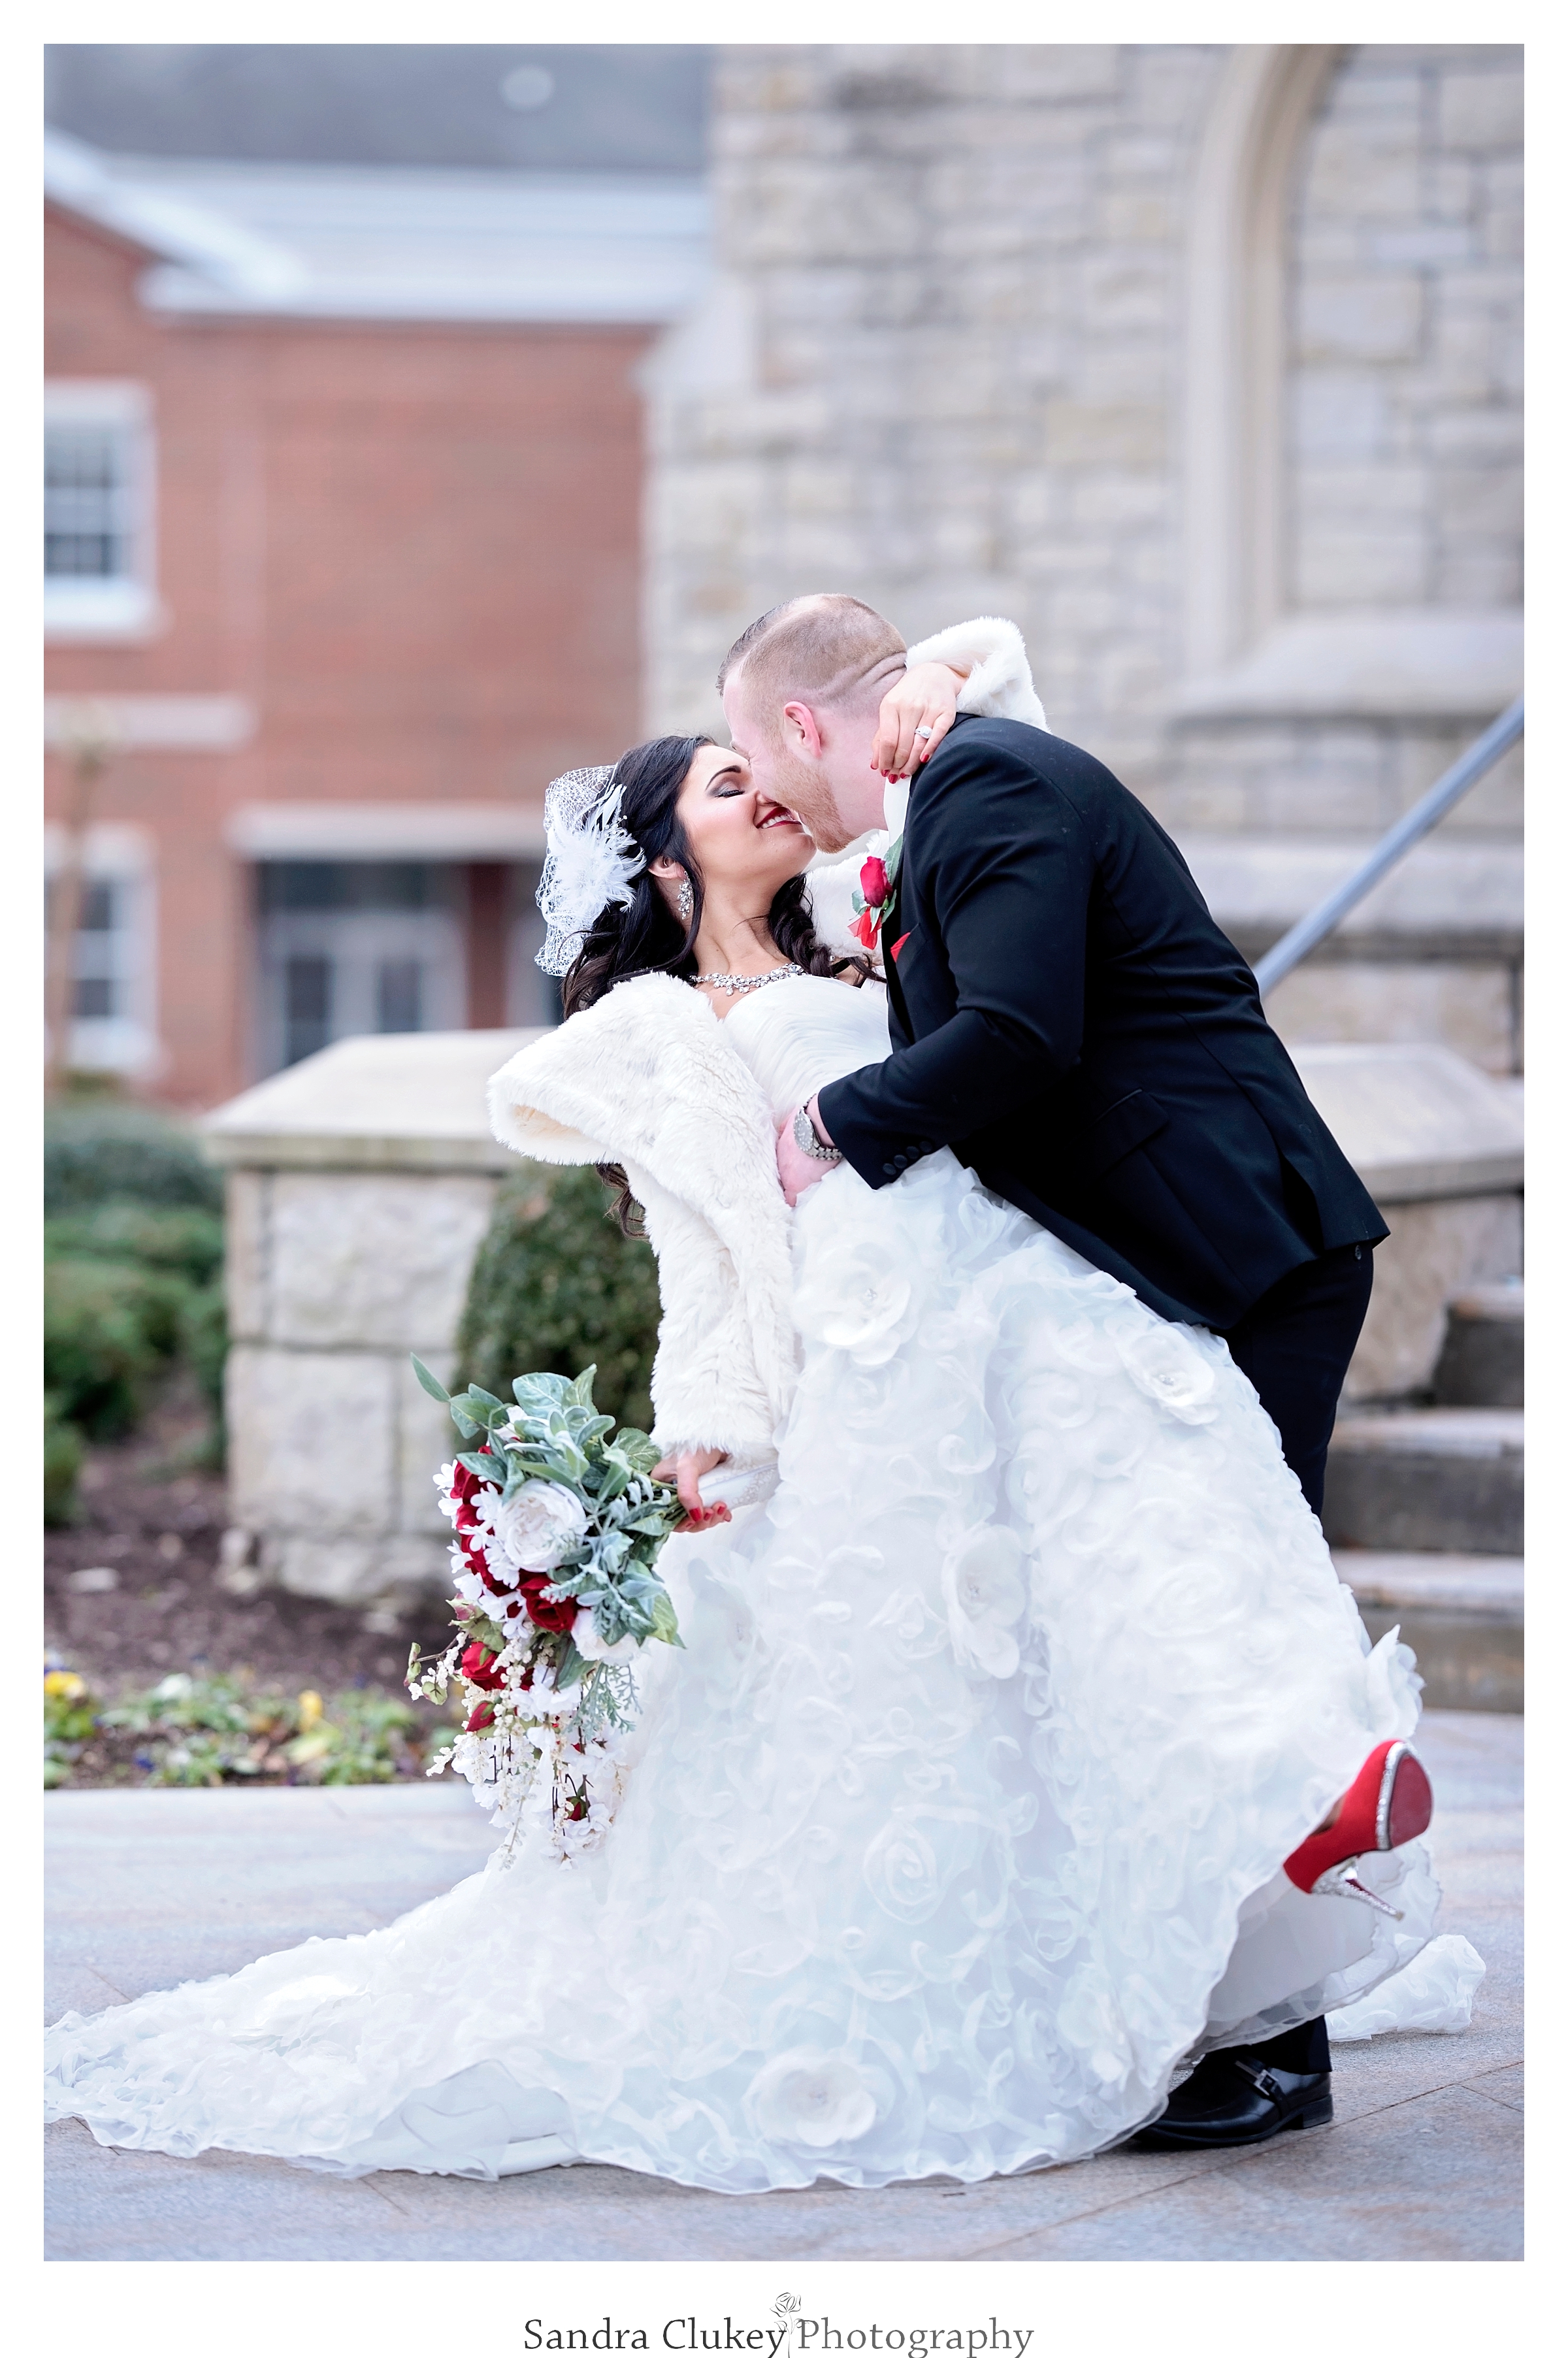 Groom and bride dip and kiss! Lee University Chapel, Cleveland TN